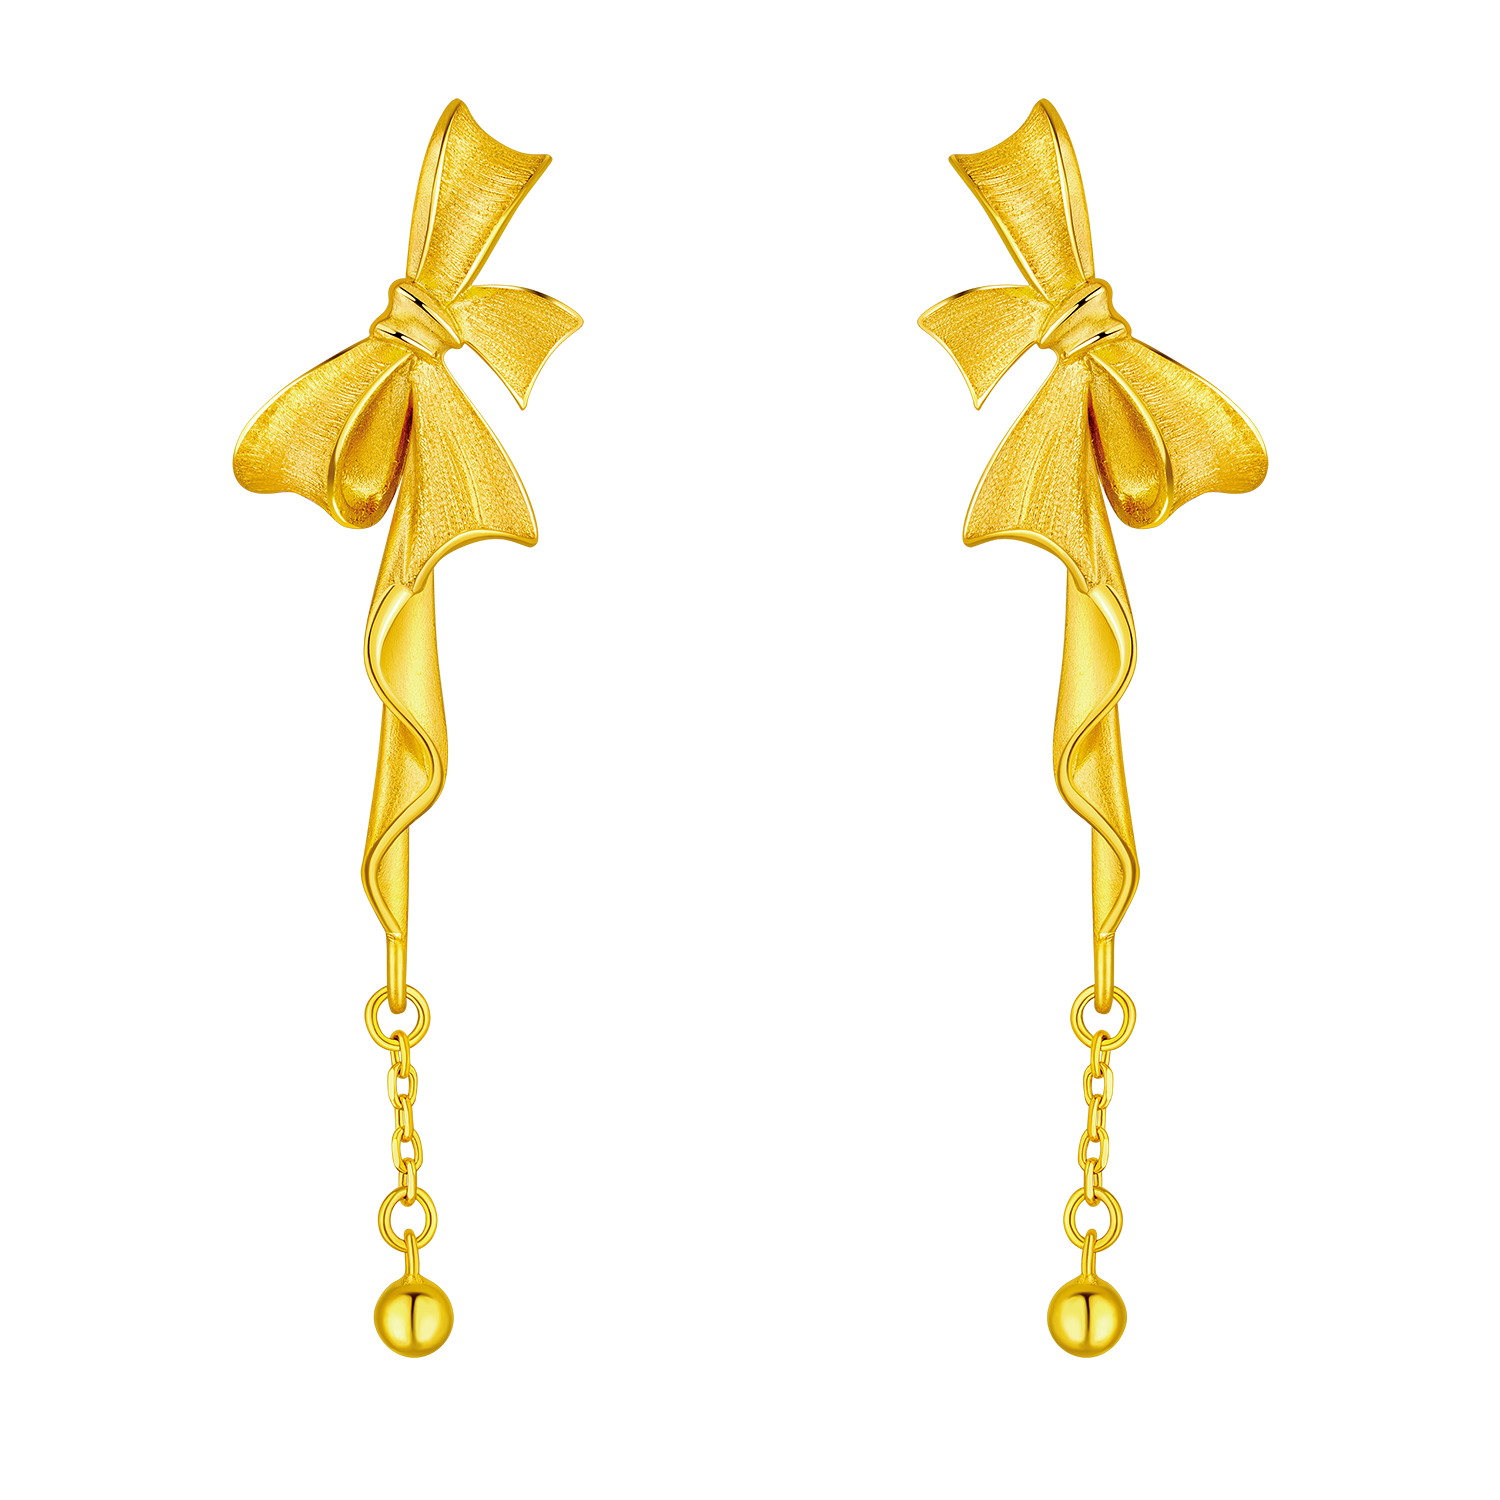 Beloved Collection "Bow of Love" Gold Earrings